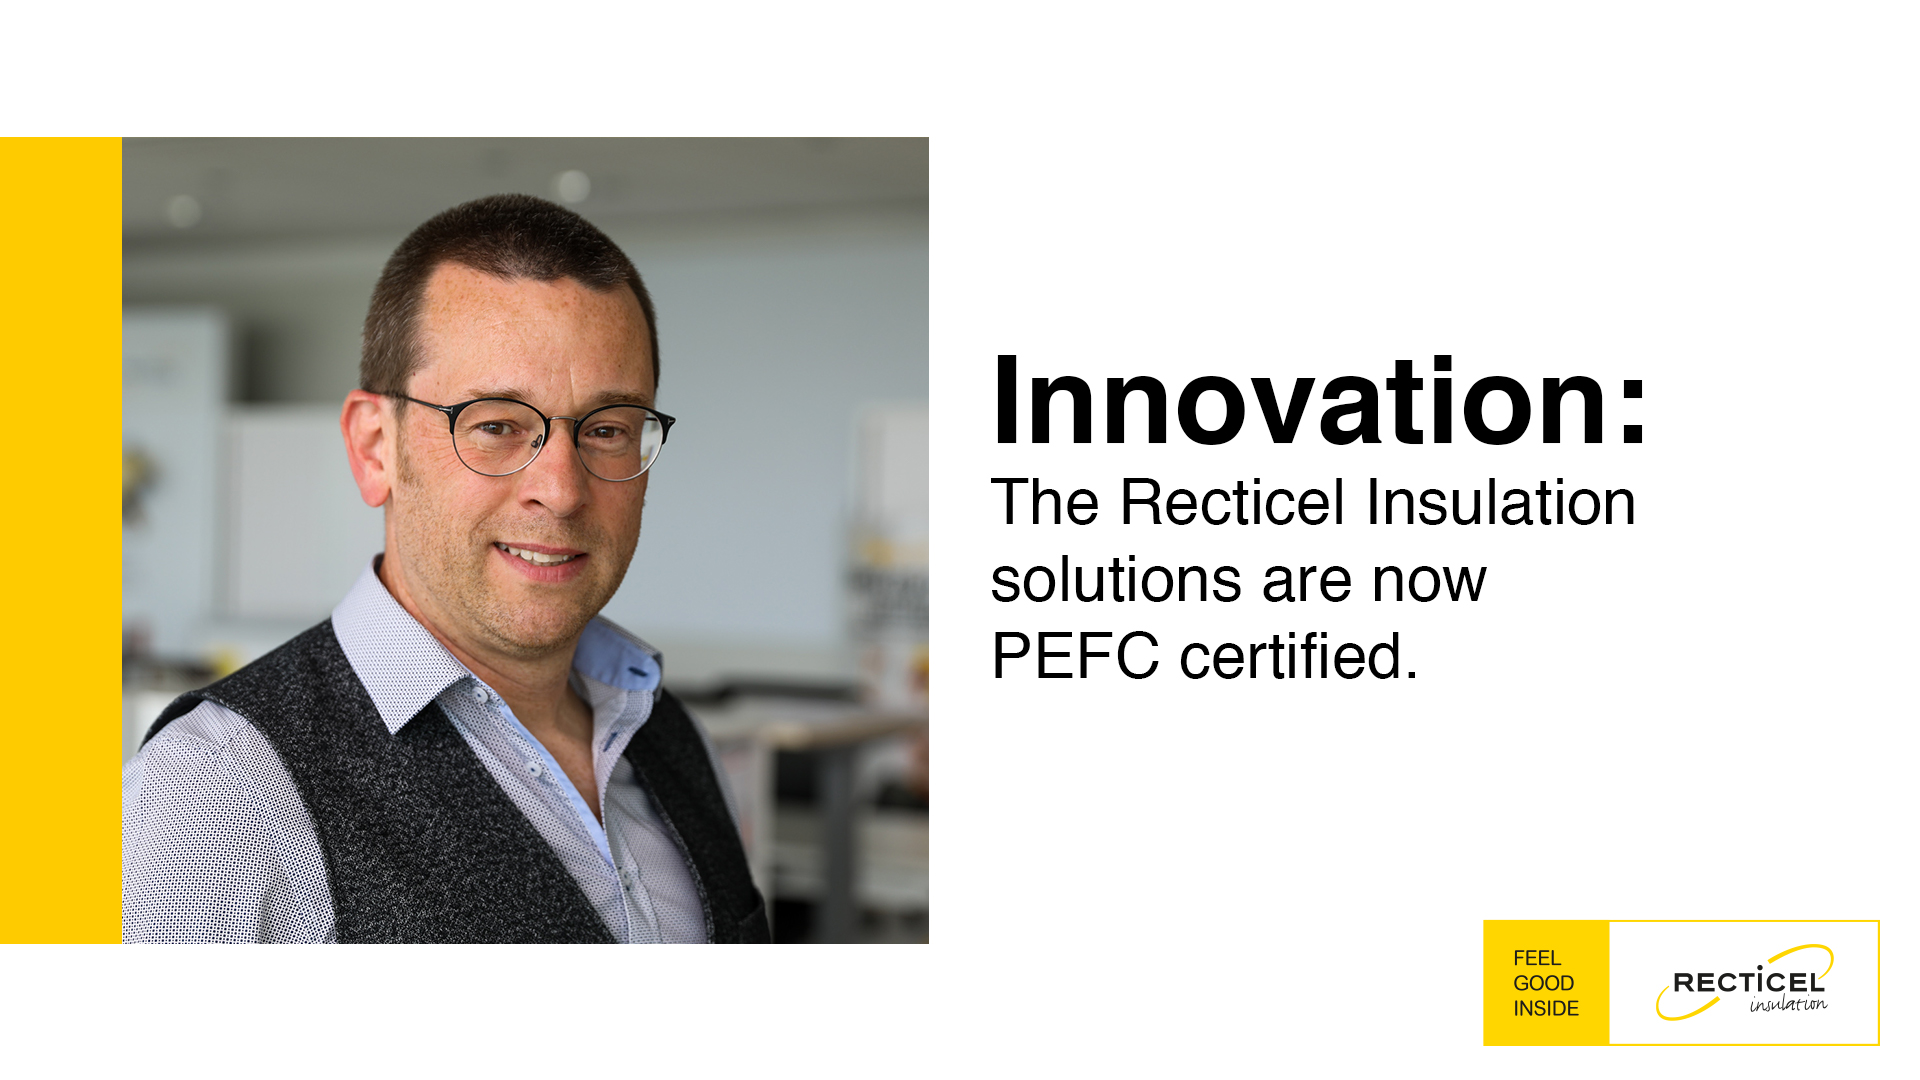 Recticel insulation solutions PEFC certified - video thumbnail